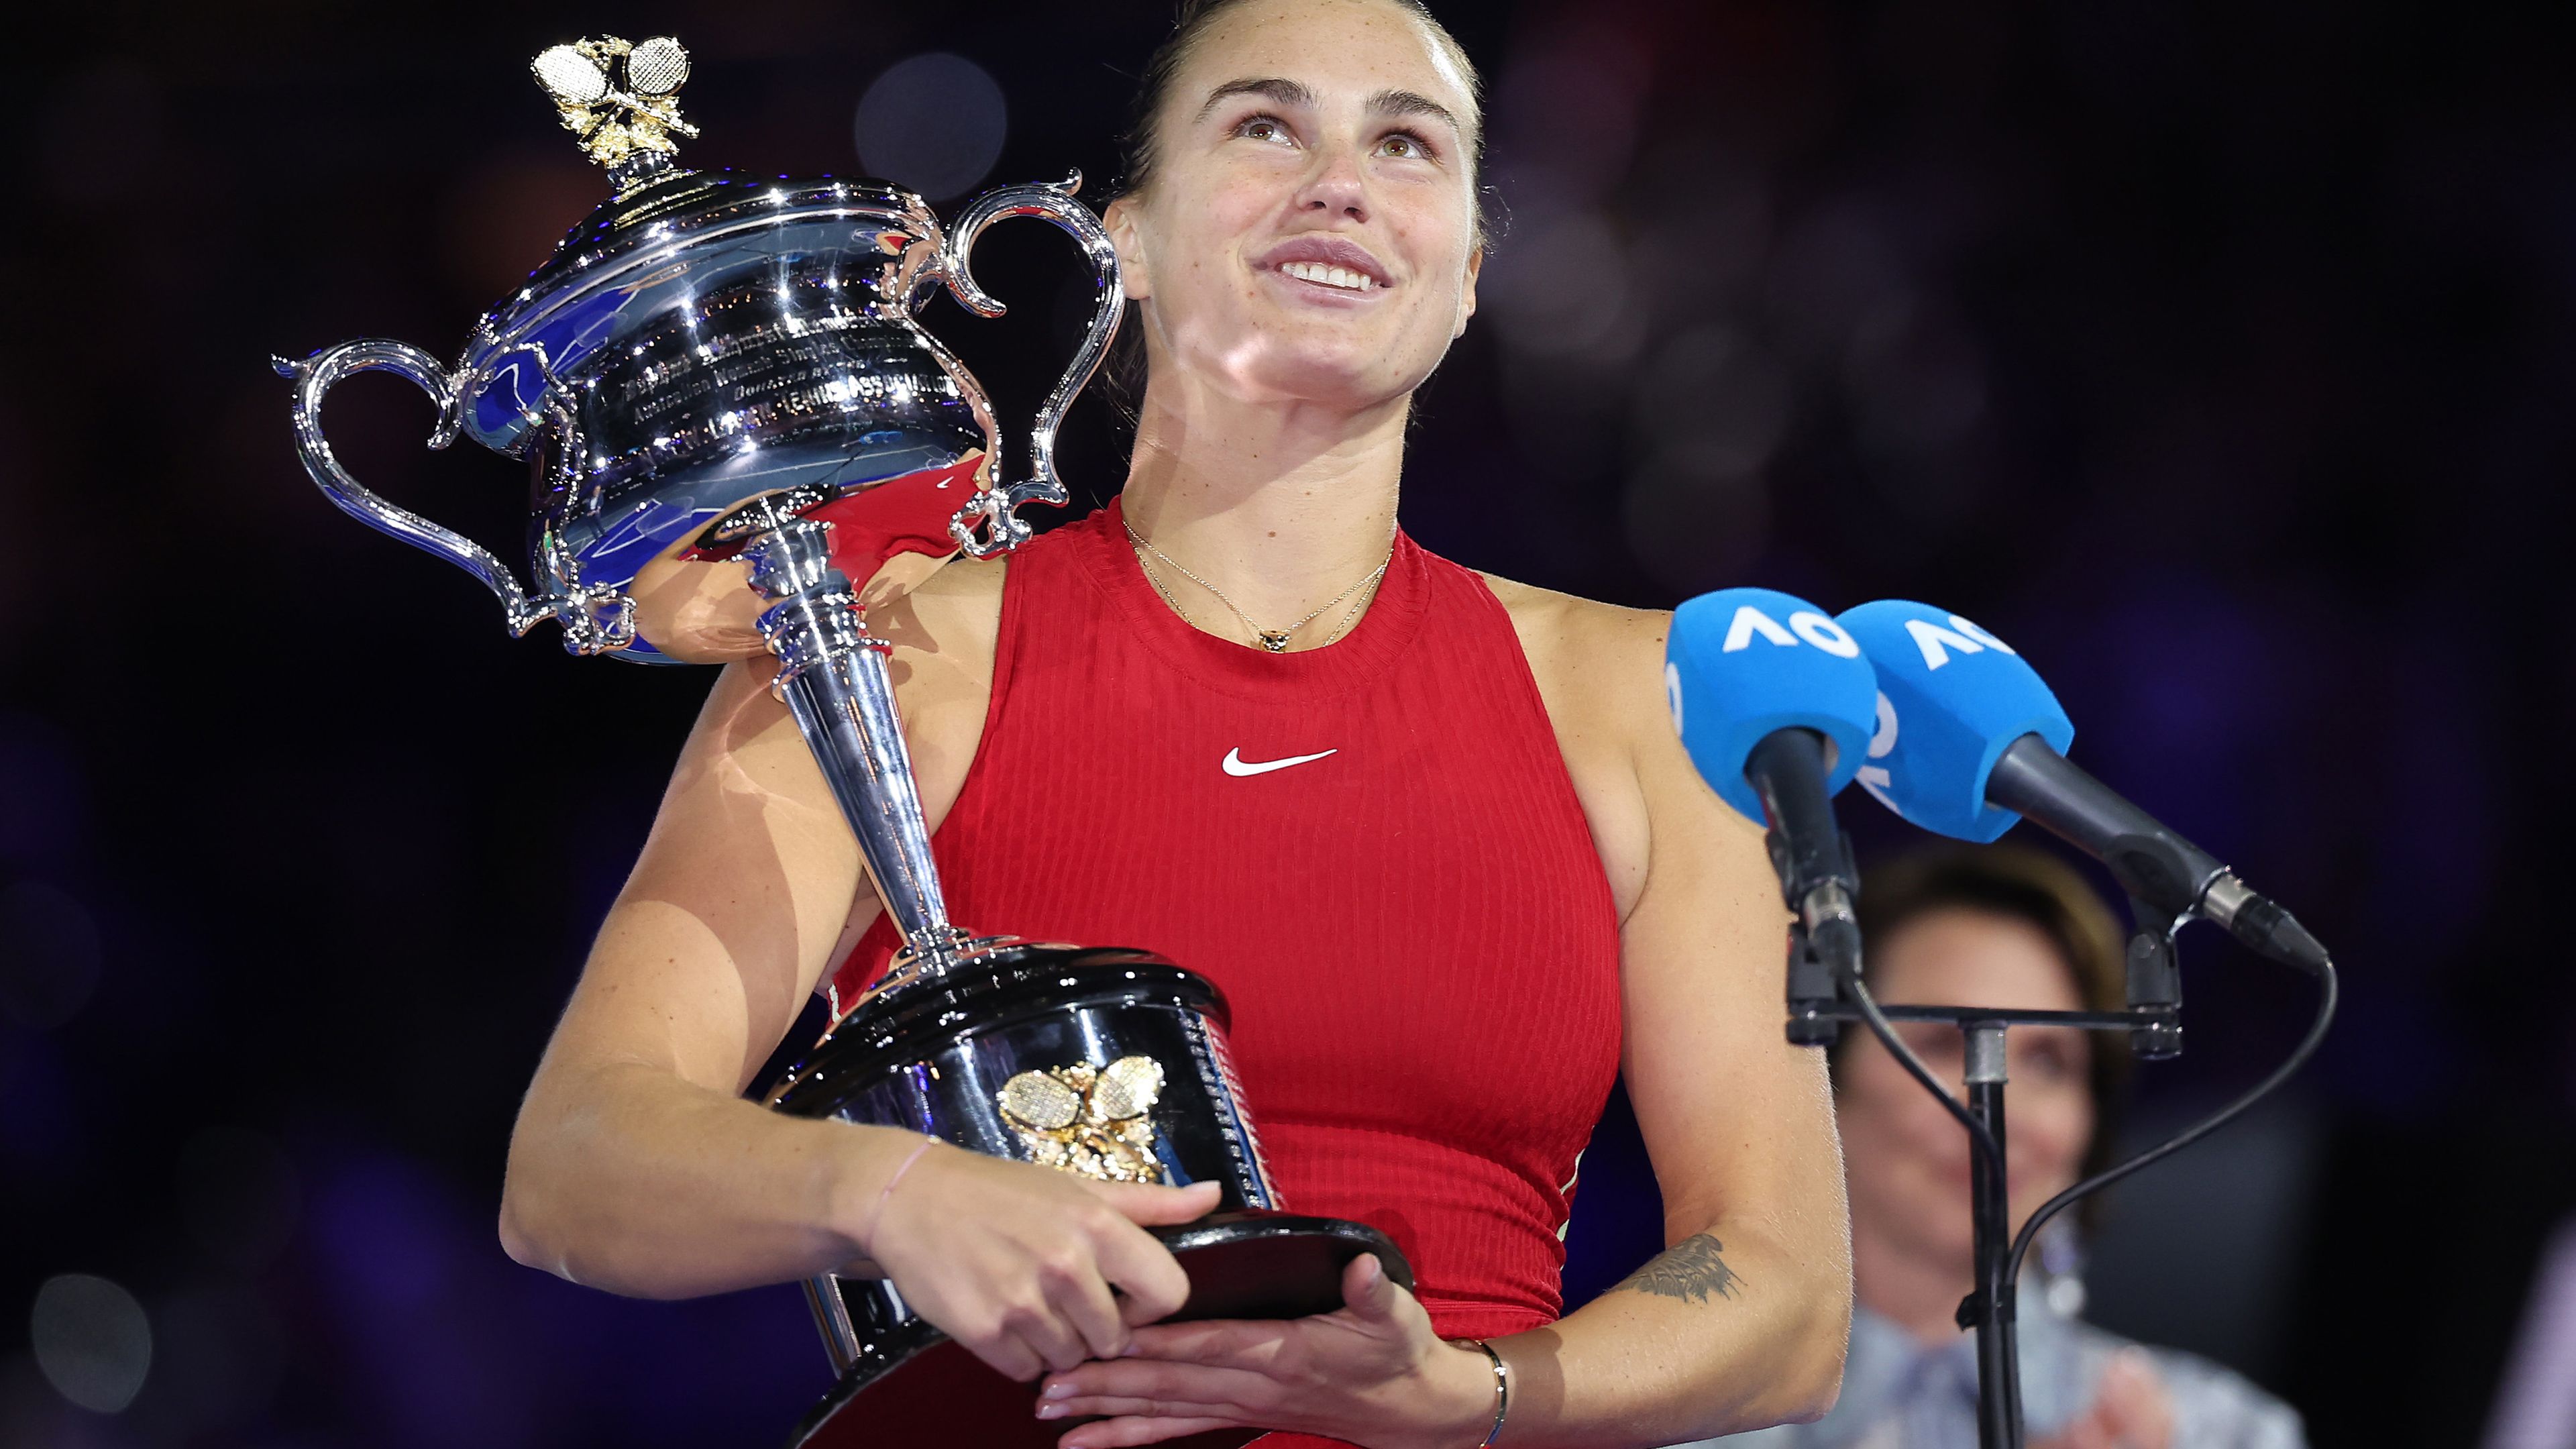 'They're not gonna understand me': Moment Aryna Sabalenka realised she was speaking wrong language